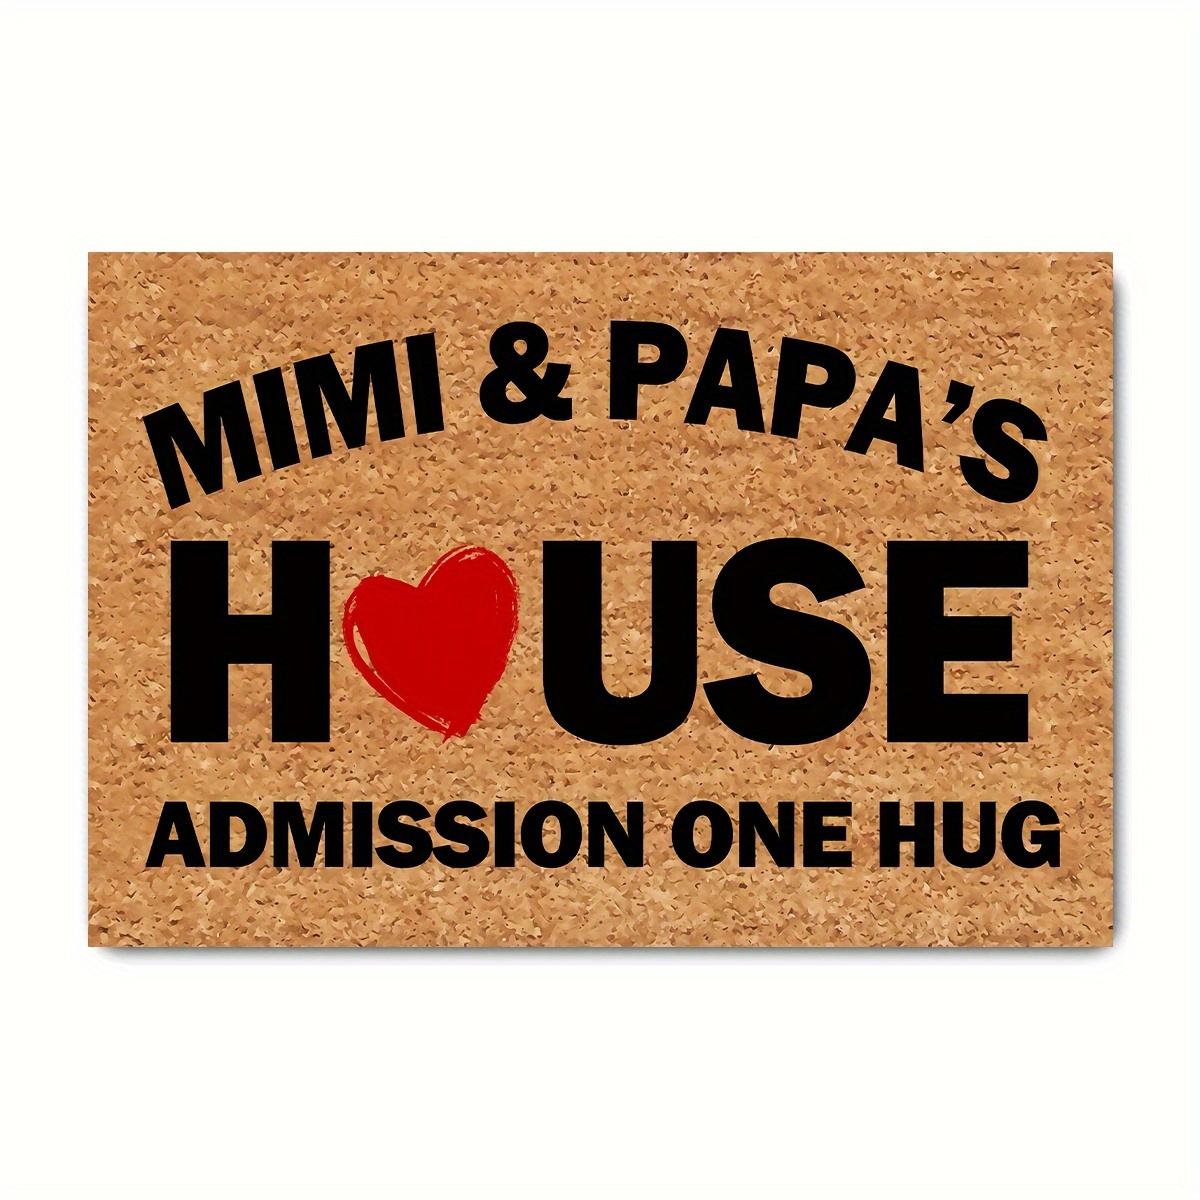 

Funny Welcome Doormat For Entrance Way Indoor Front Porch Rugs Mimi And Papa's House Admission 1 Hug Personalized Funny Home Decor Back Door Mat Anti-slip Novelty Prank Gift Mats23.7"(l) X 15.9"(w)